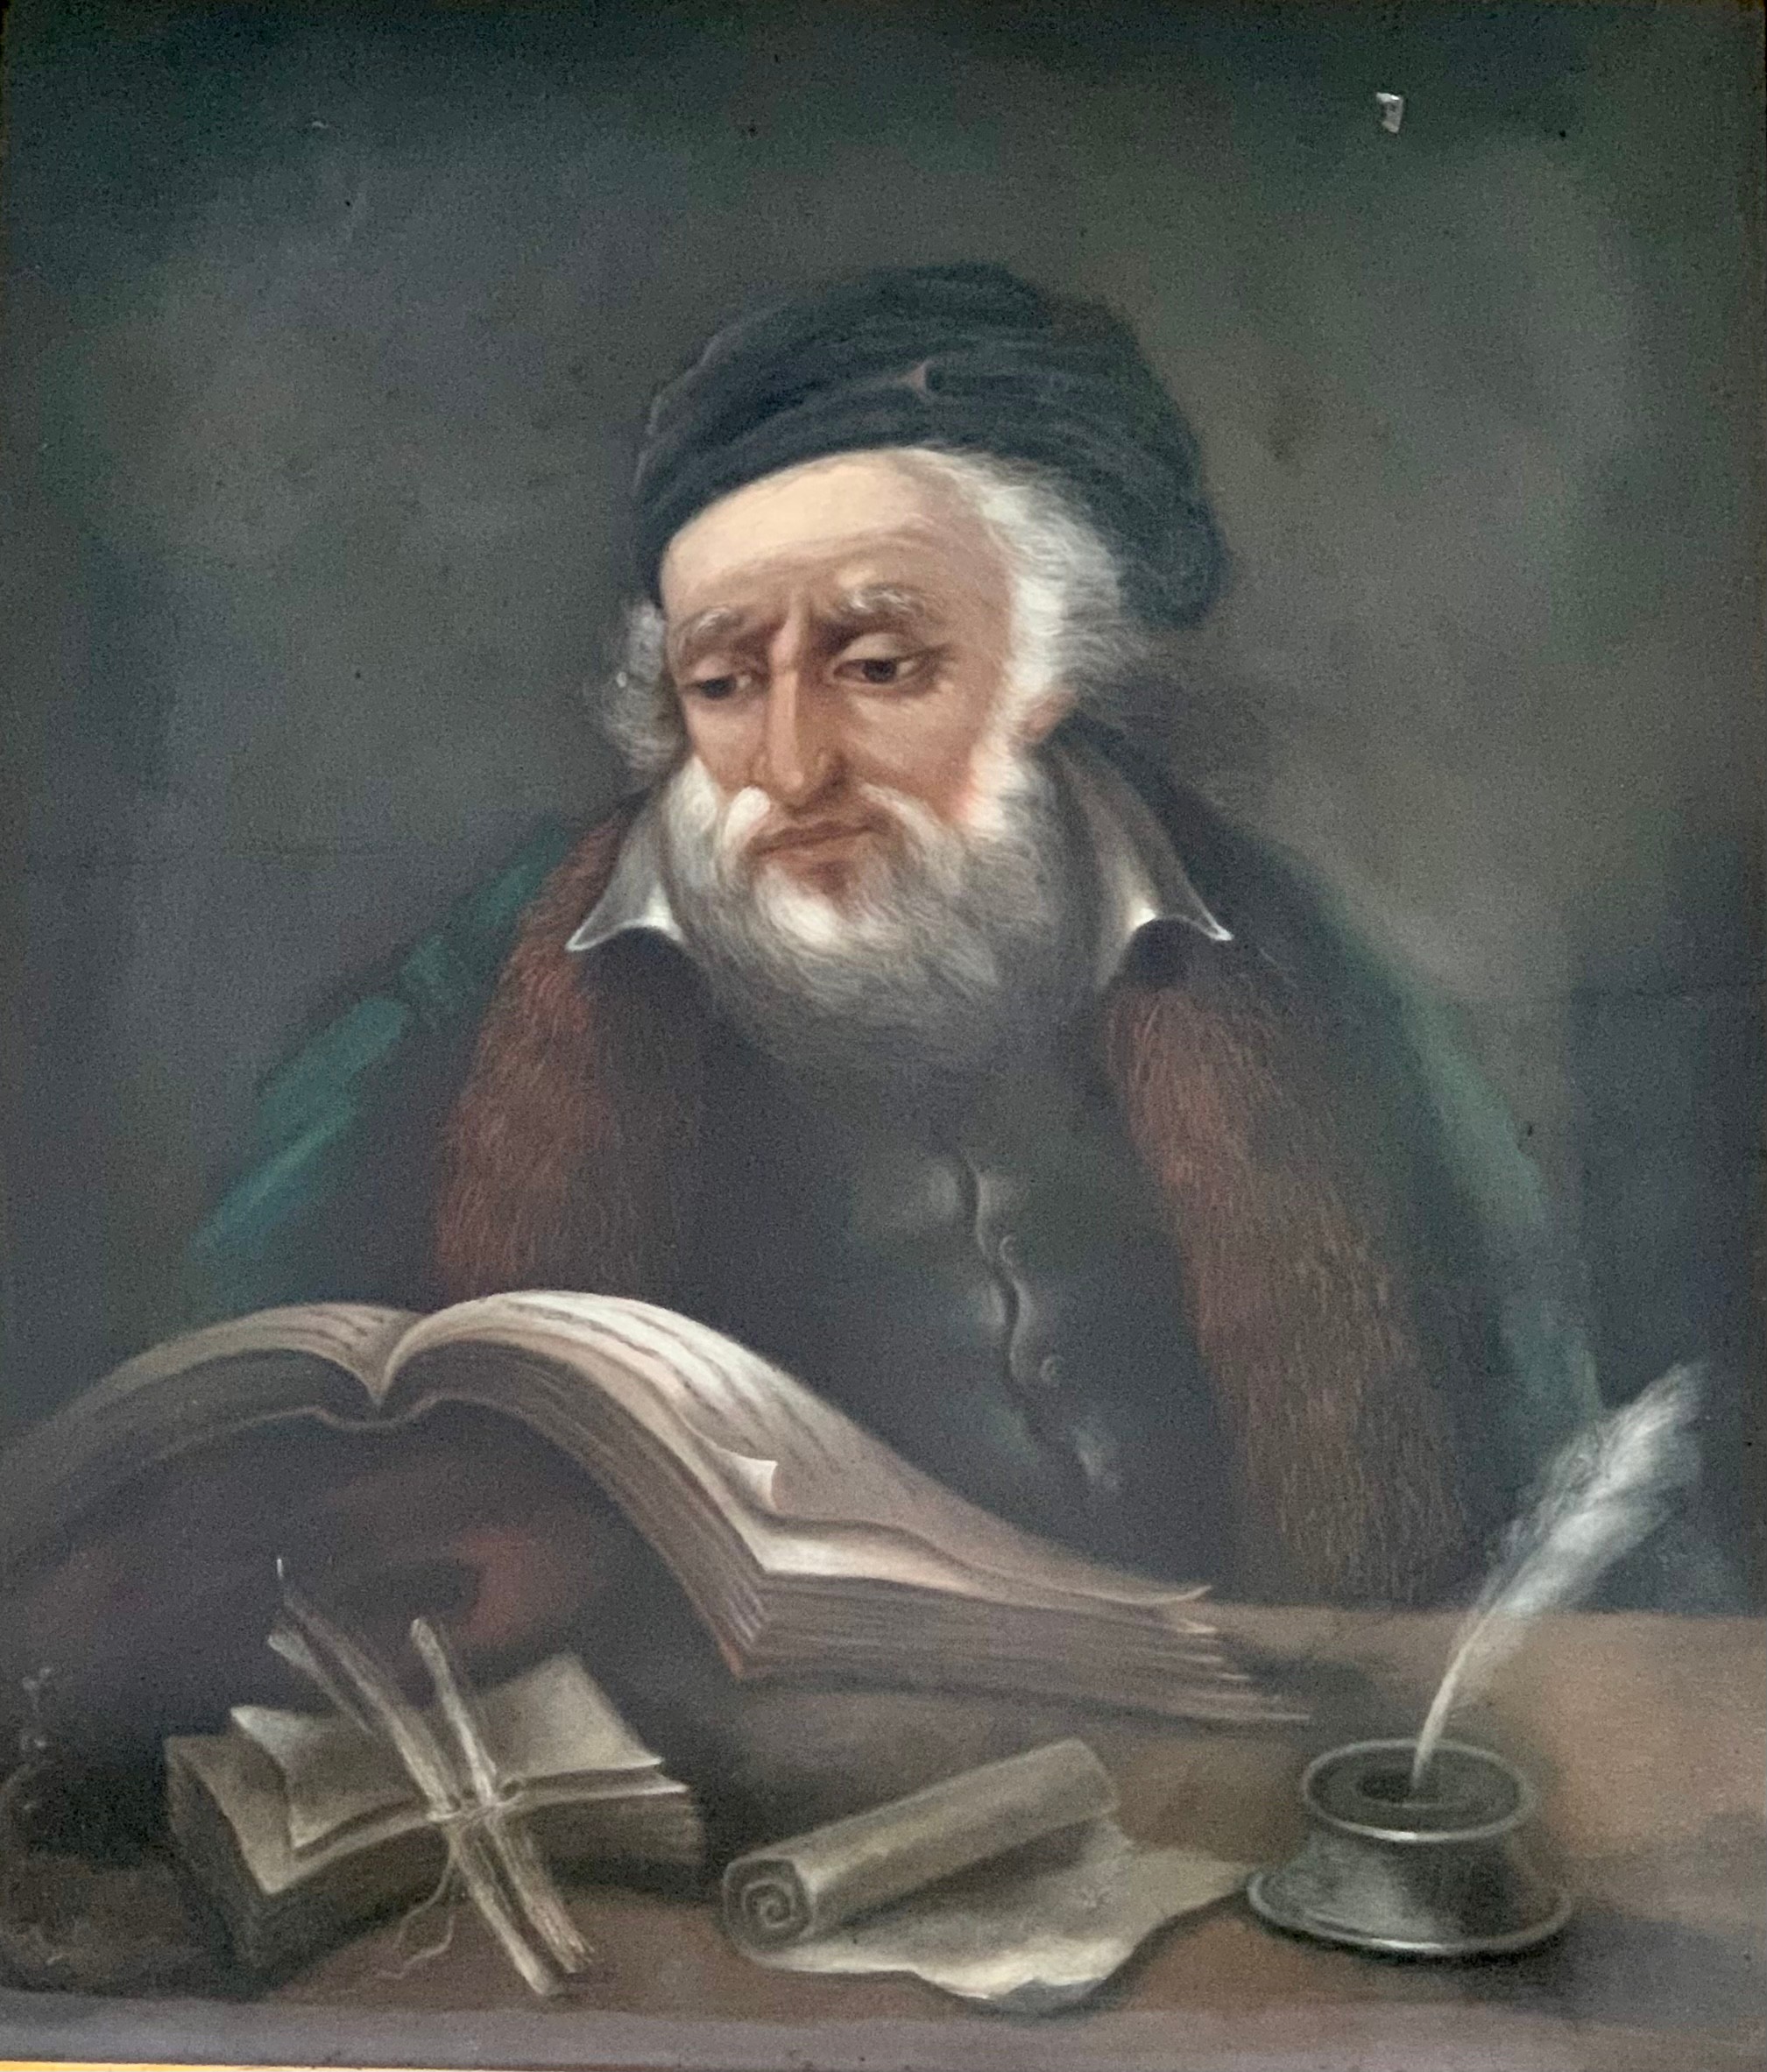 19th / 20th Century pastel on paper drawing of a scholar reading at a desk, a bearded man with white